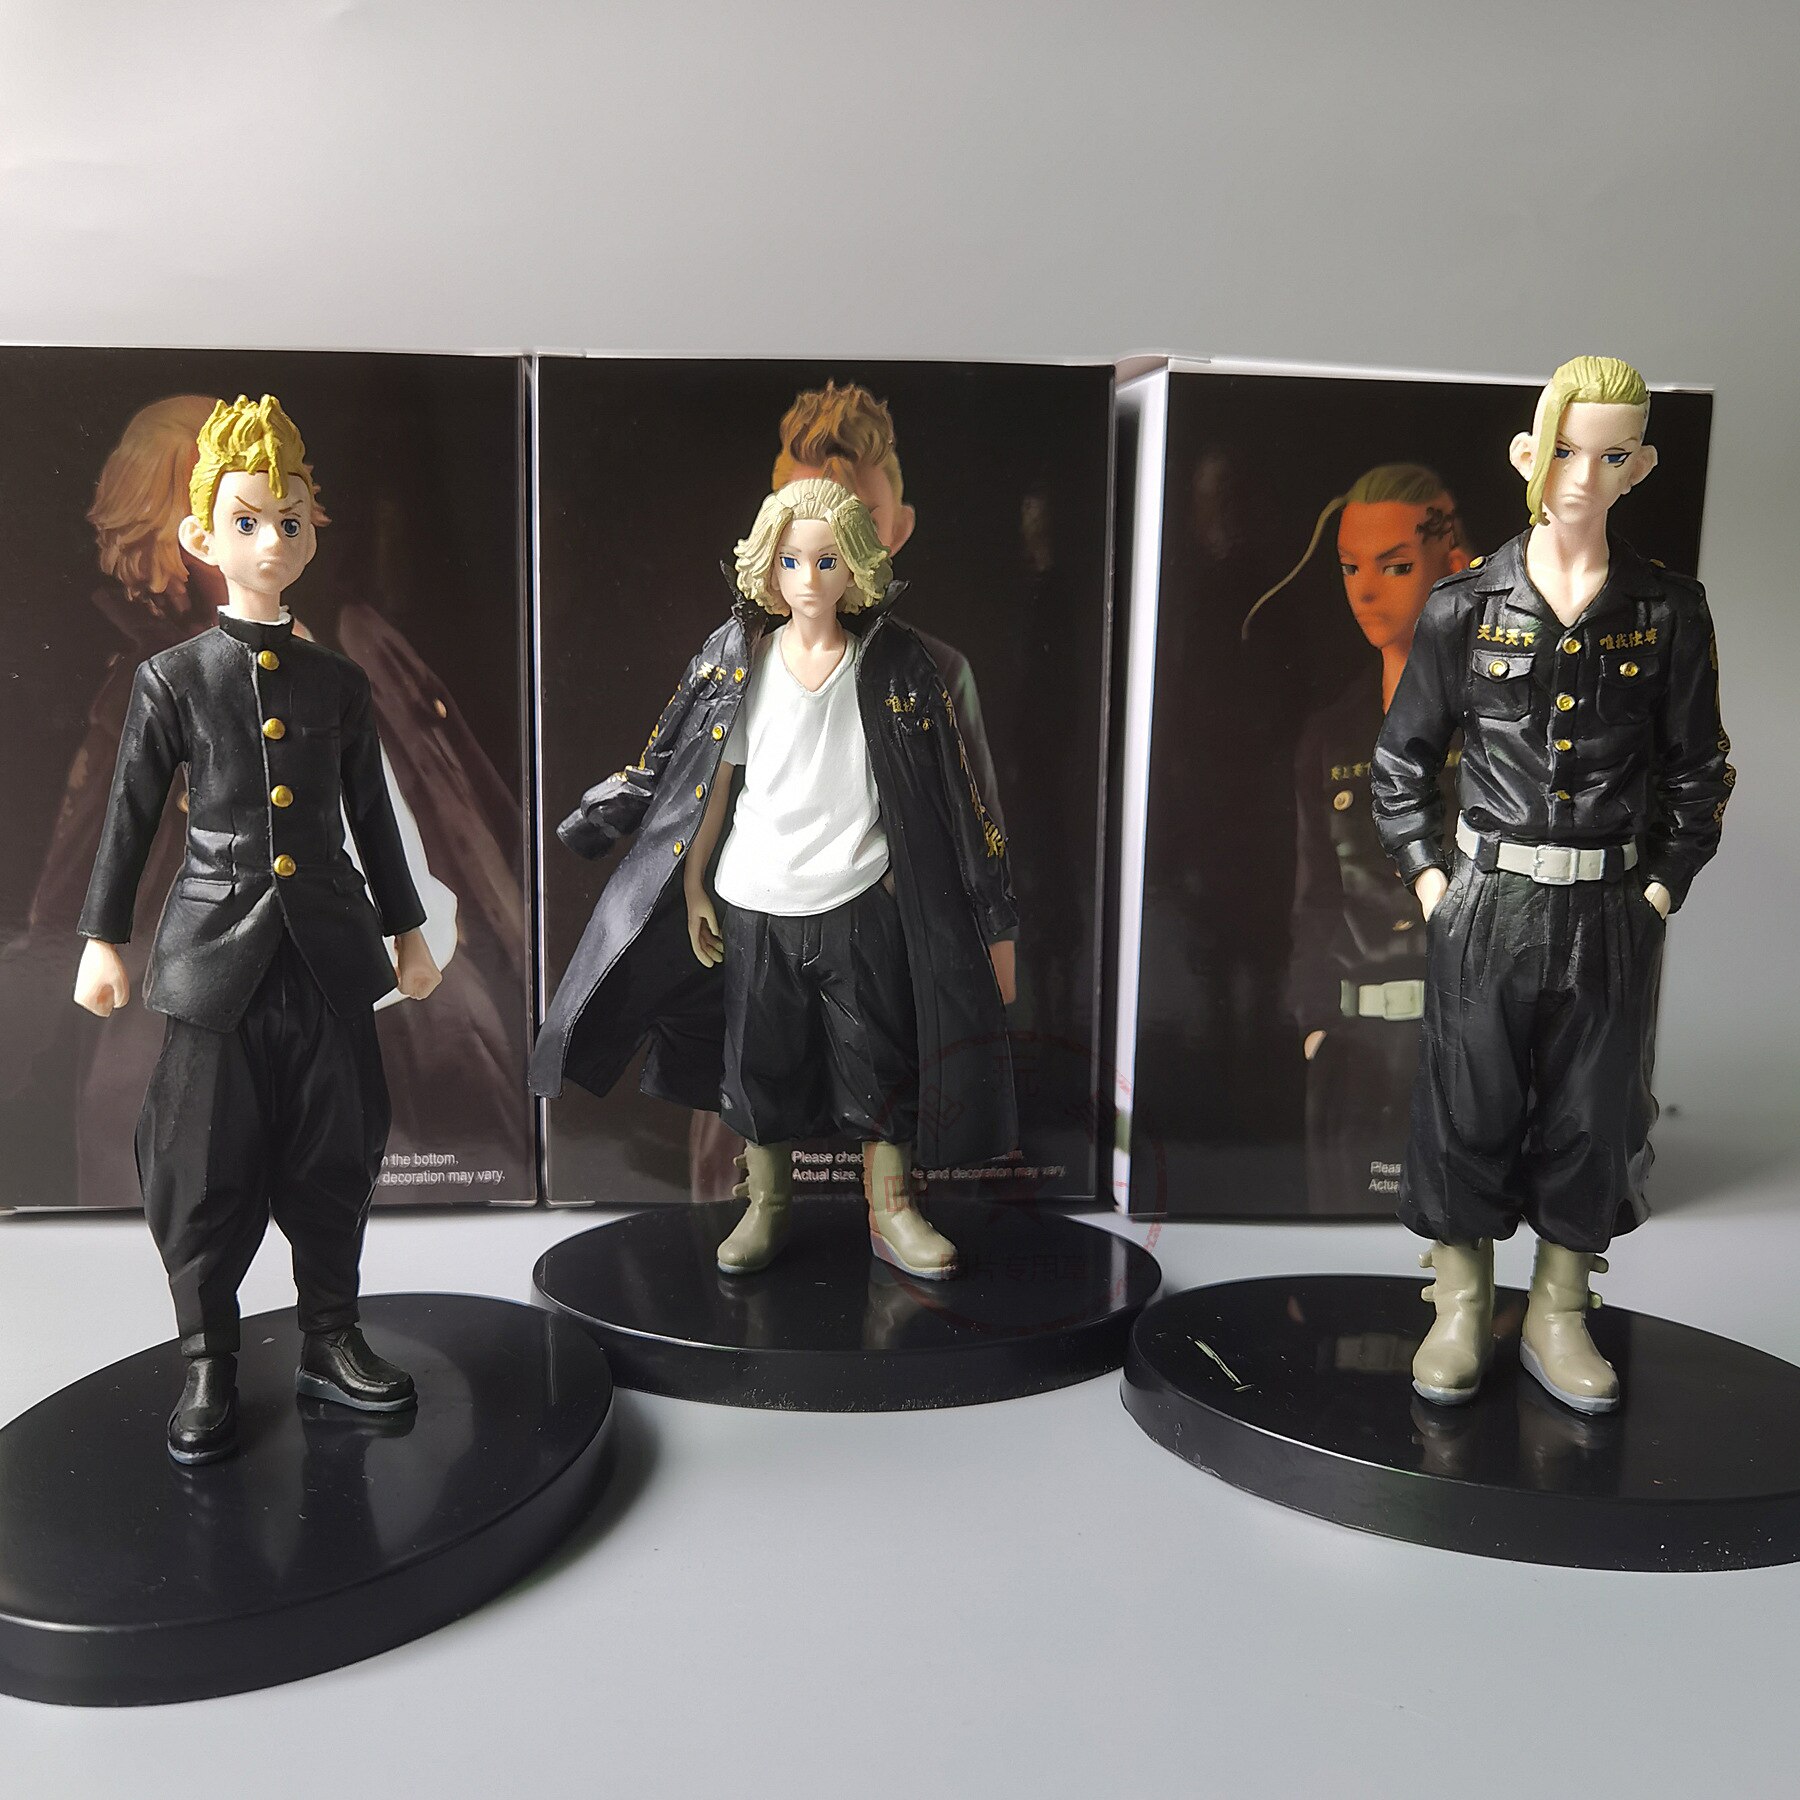 Tokyo Revengers – Different Characters Themed Cool Action Figures (7 Designs) Action & Toy Figures